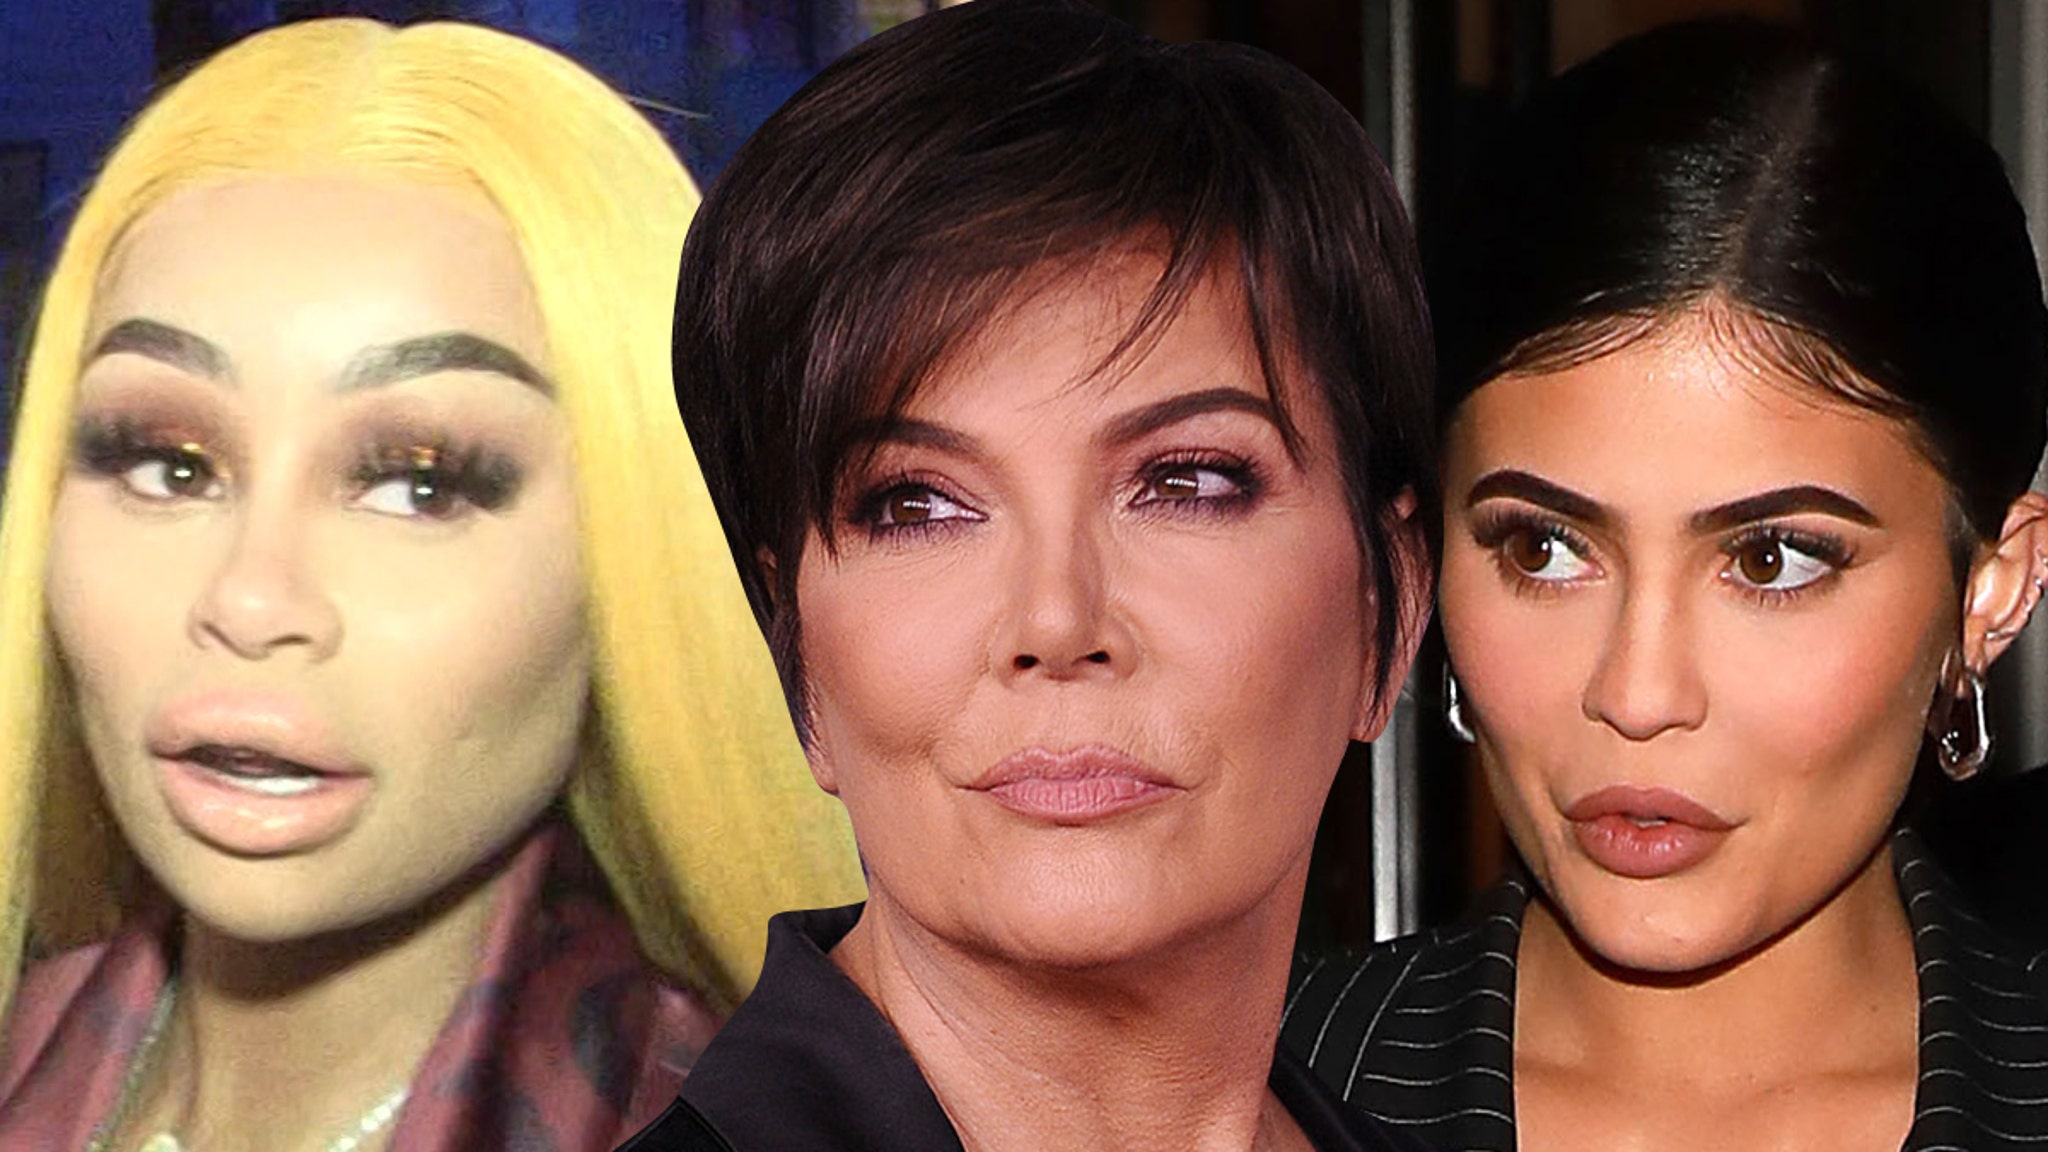 Blac Chyna Threatened to Kill Kylie Jenner According to Kris Jenner thumbnail